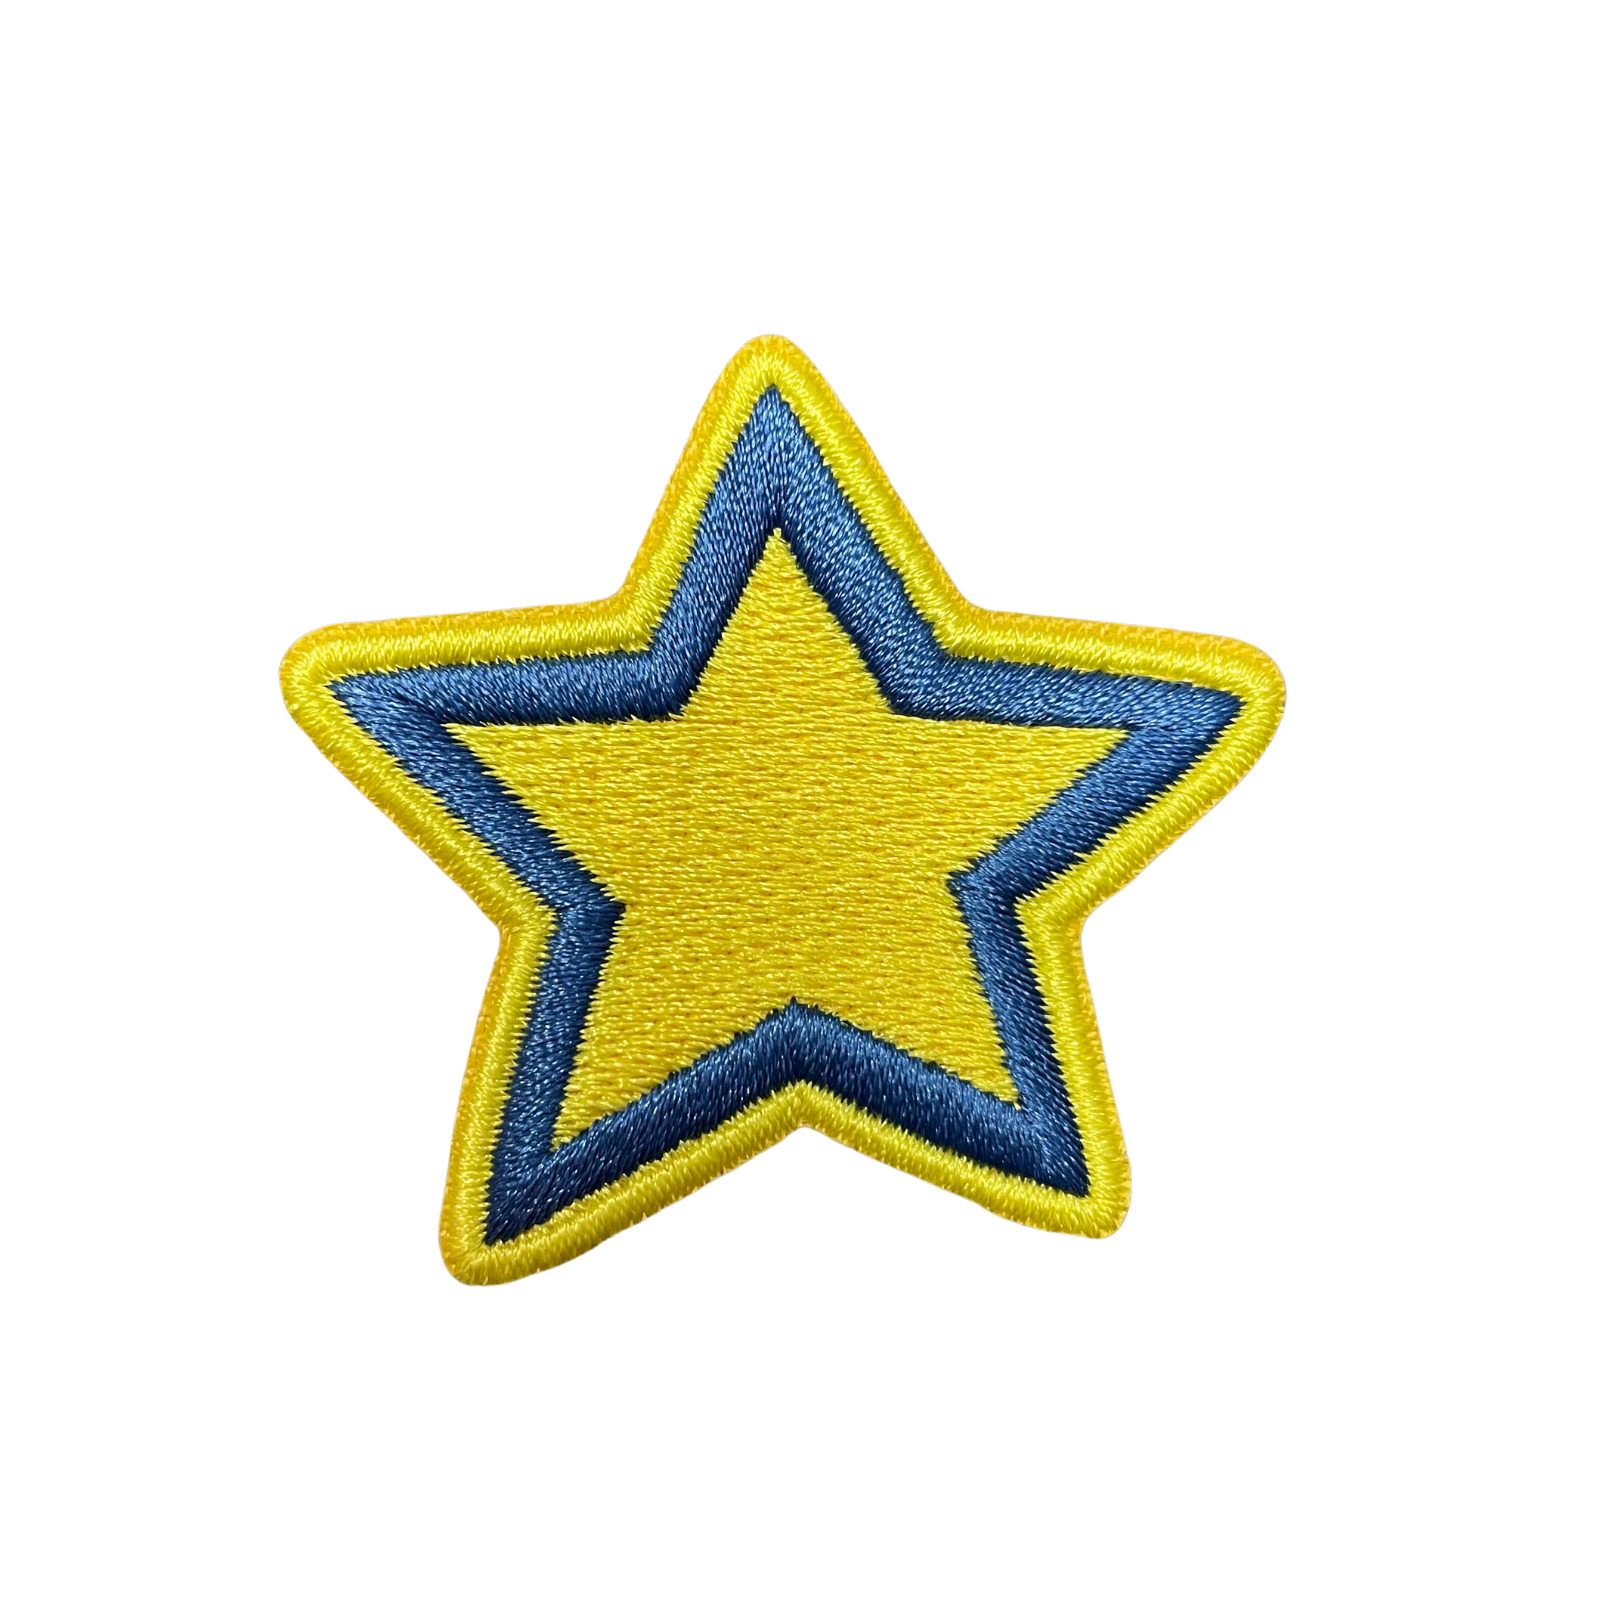 Iron on Patches - Blue Star Patch Iron on Patch Embroidered Applique Star S-50